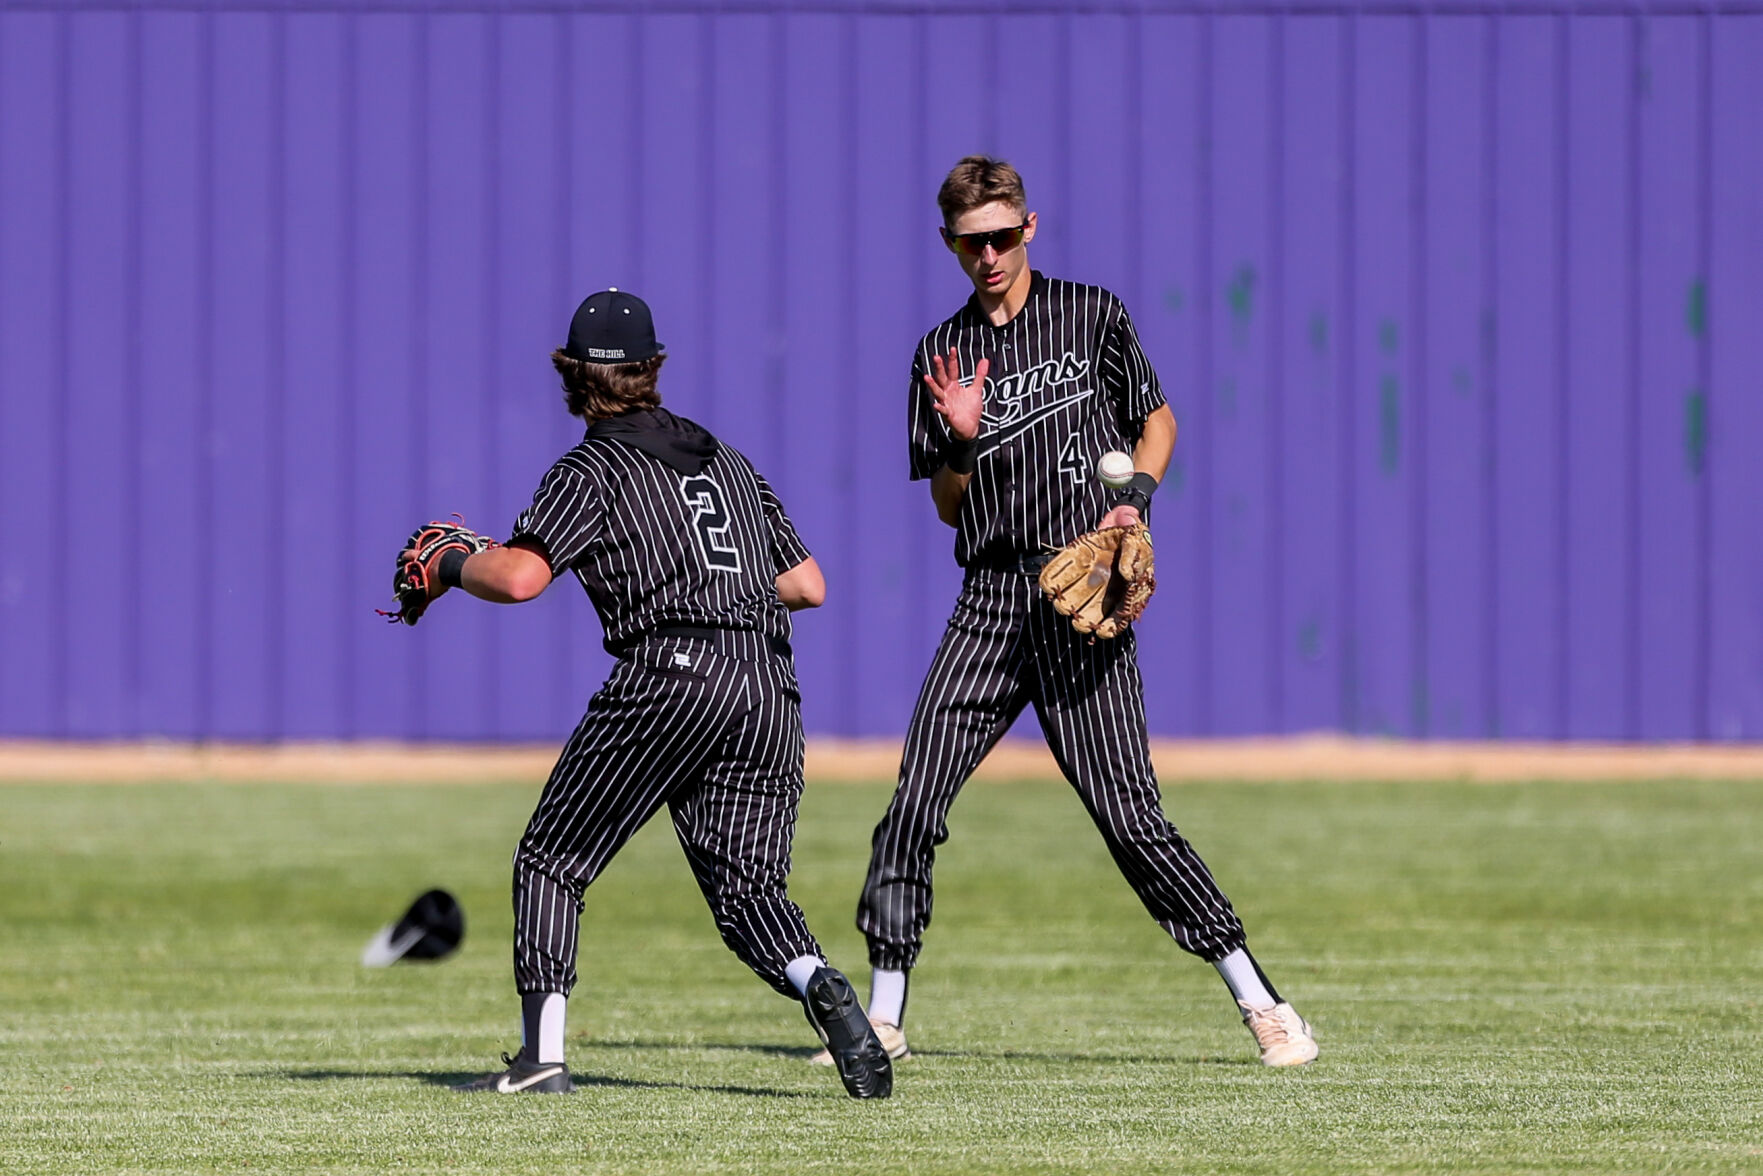 Highland Baseball’s State Tournament Woes Continue with Loss to Owyhee